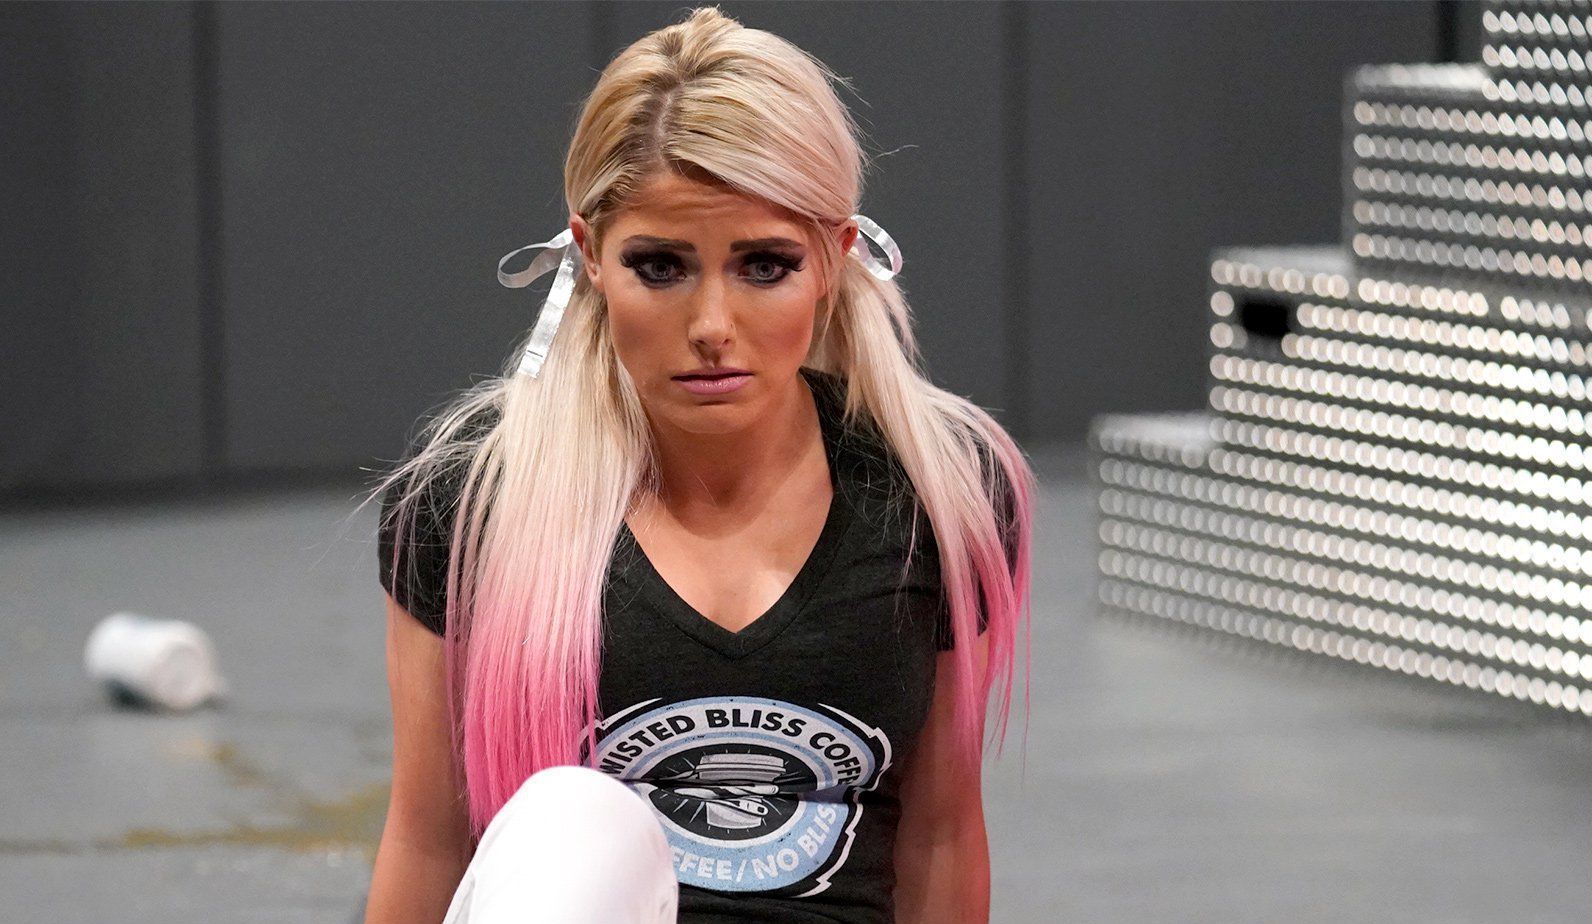 Alexa Bliss has sent an important message to her fans